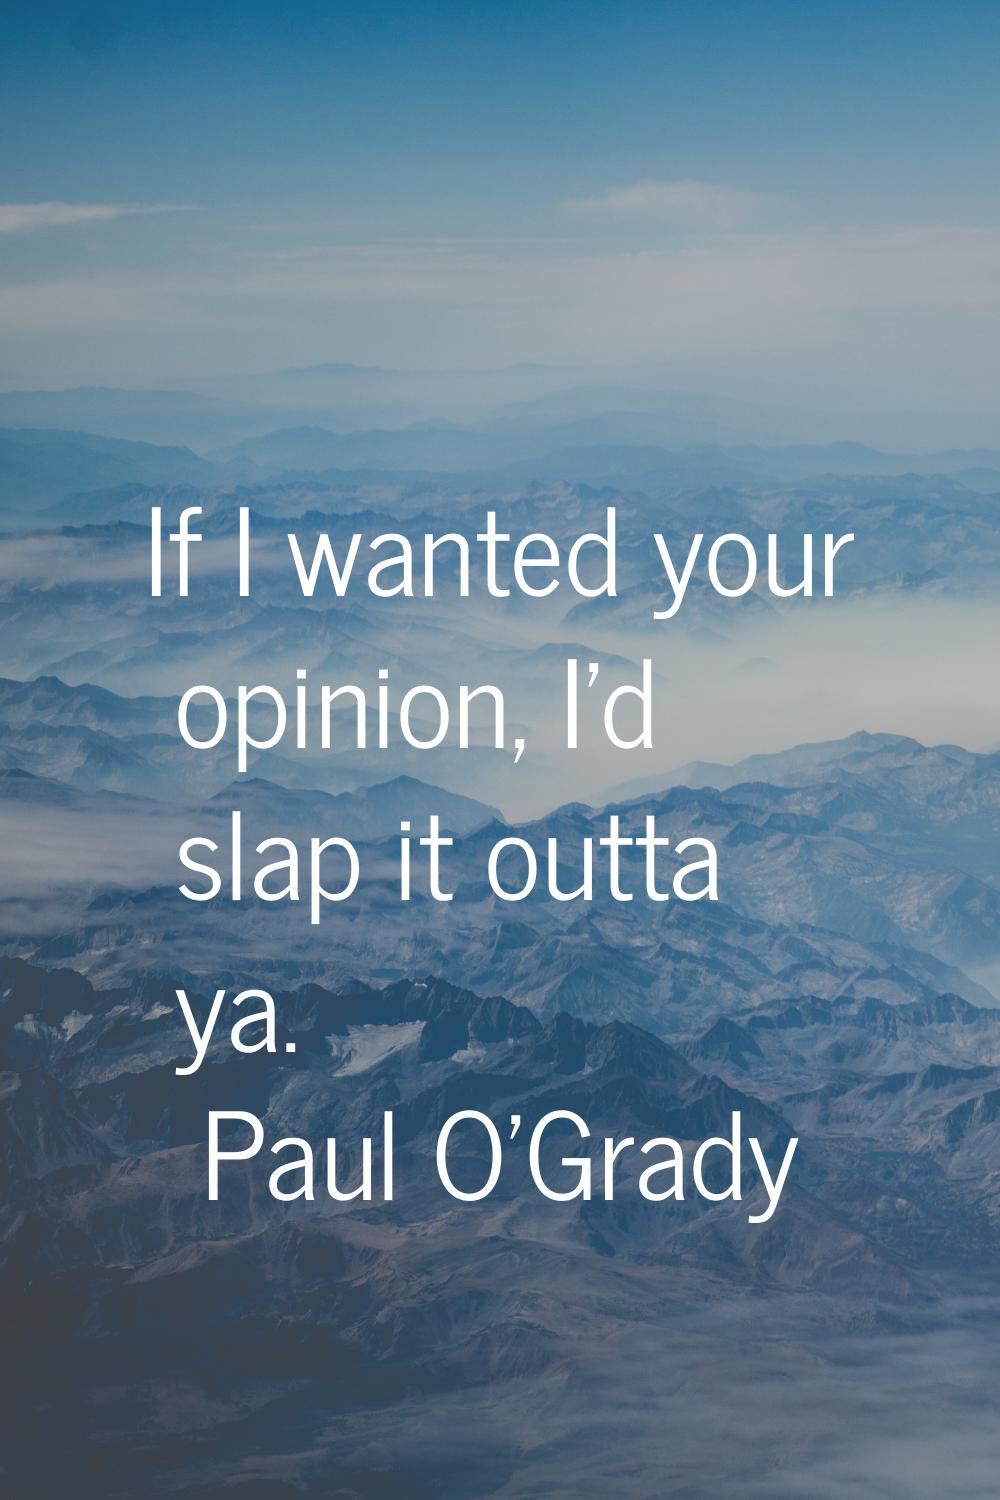 If I wanted your opinion, I'd slap it outta ya.